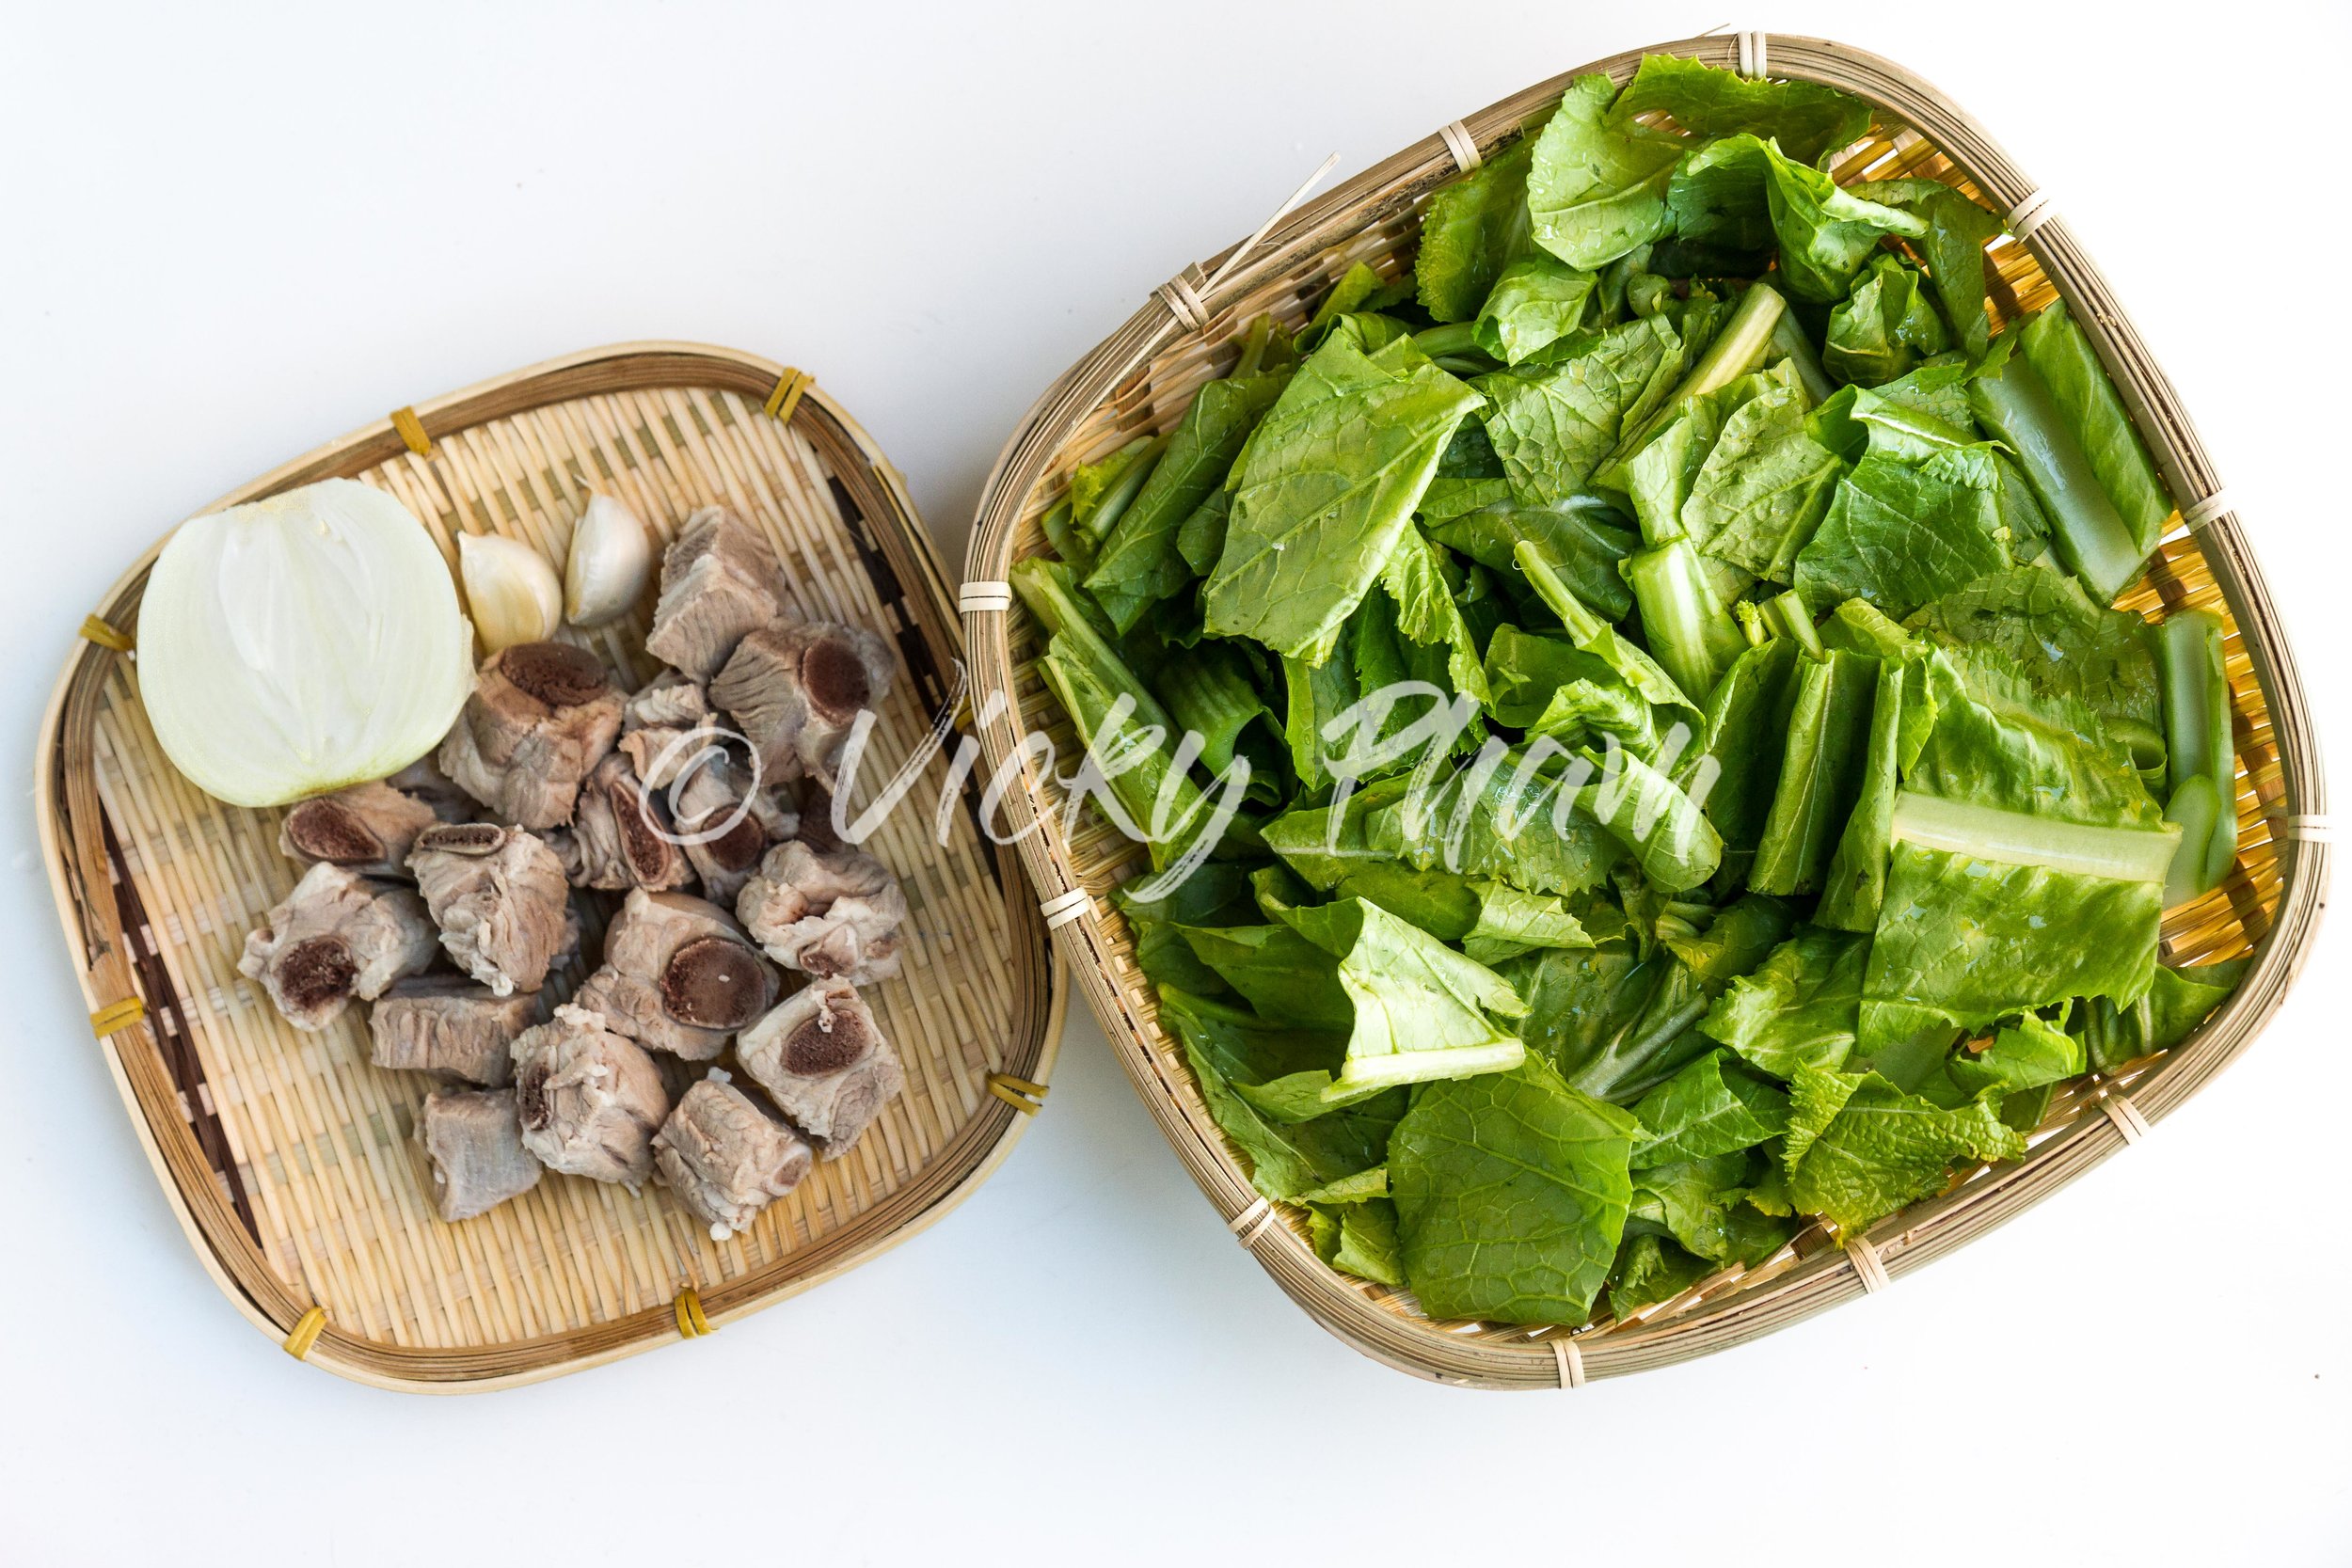 https://images.squarespace-cdn.com/content/v1/52d3fafee4b03c7eaedee15f/1552622035834-FE3HTS3FPG7WI4HCCEAK/Vietnamese+Mustard+Green+Soup+Canh+Cai+Be+Xanh